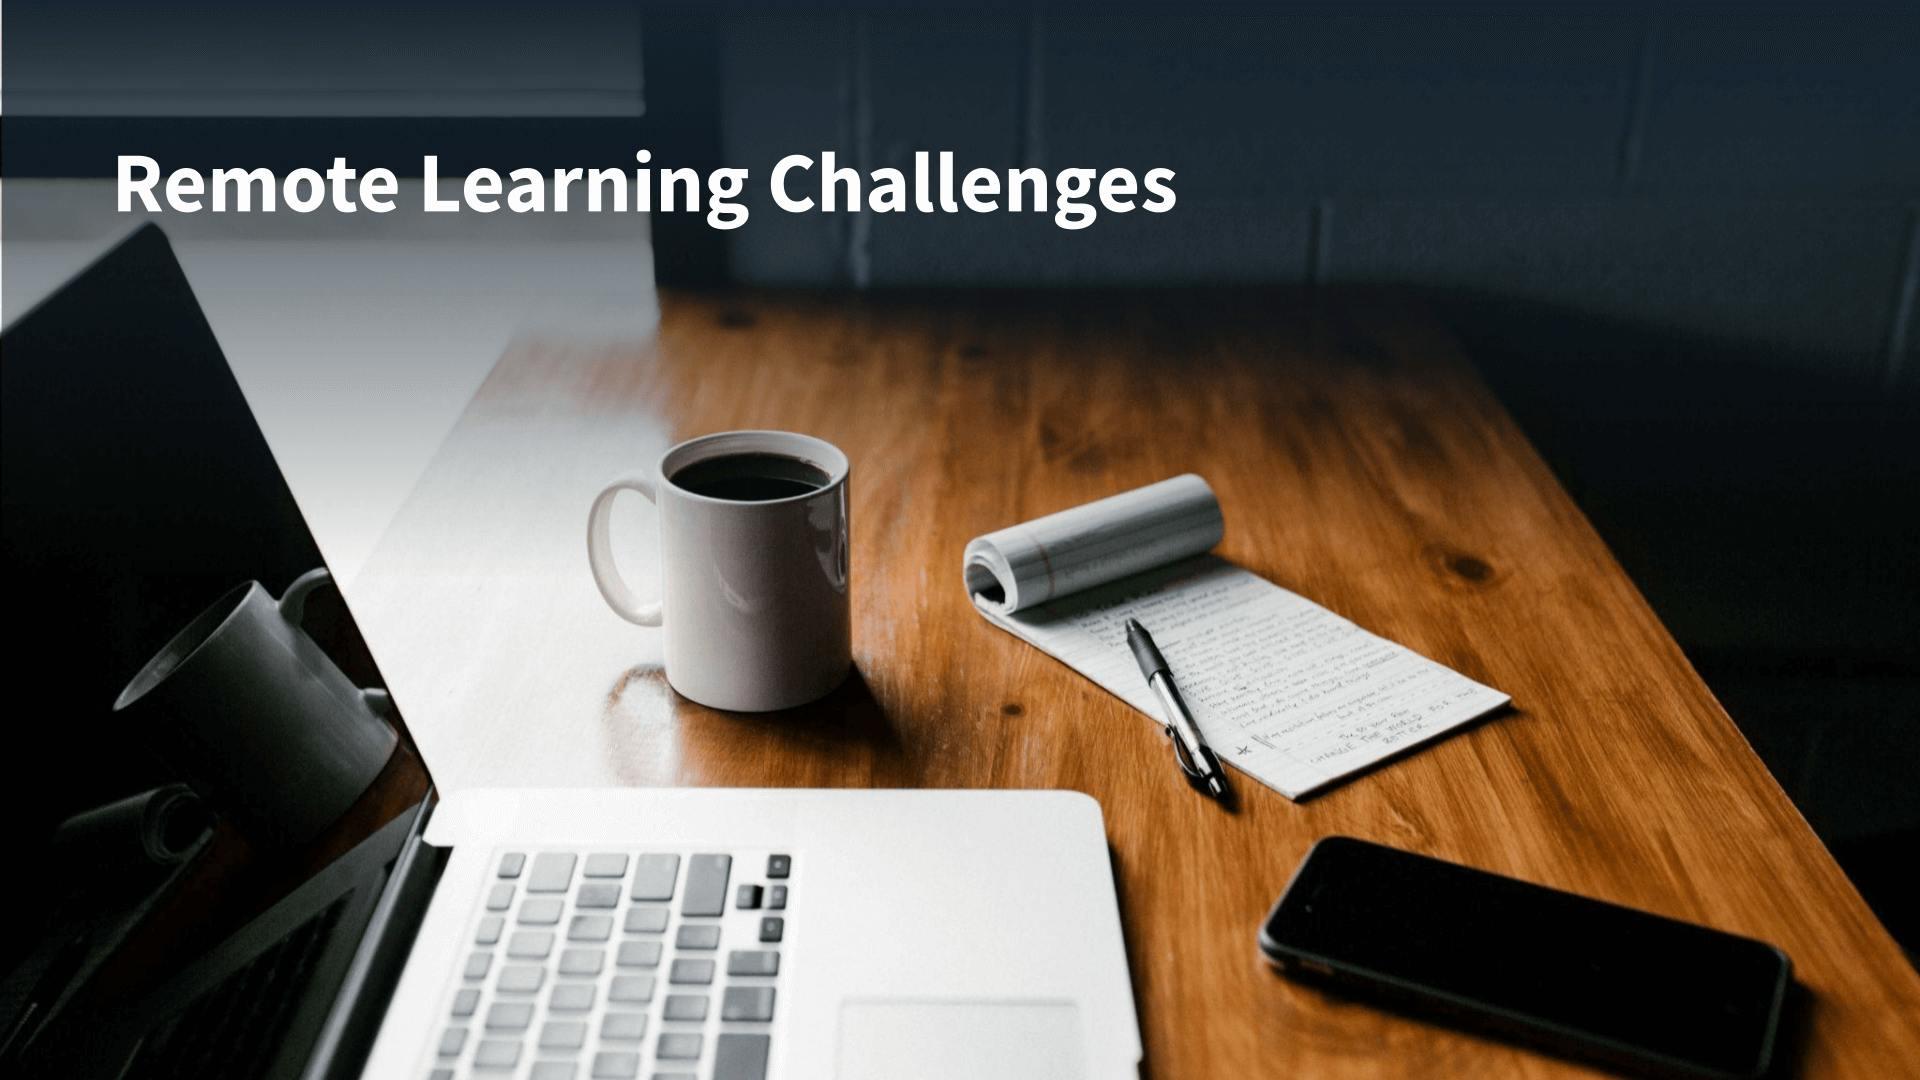 Remote Learning Challenges